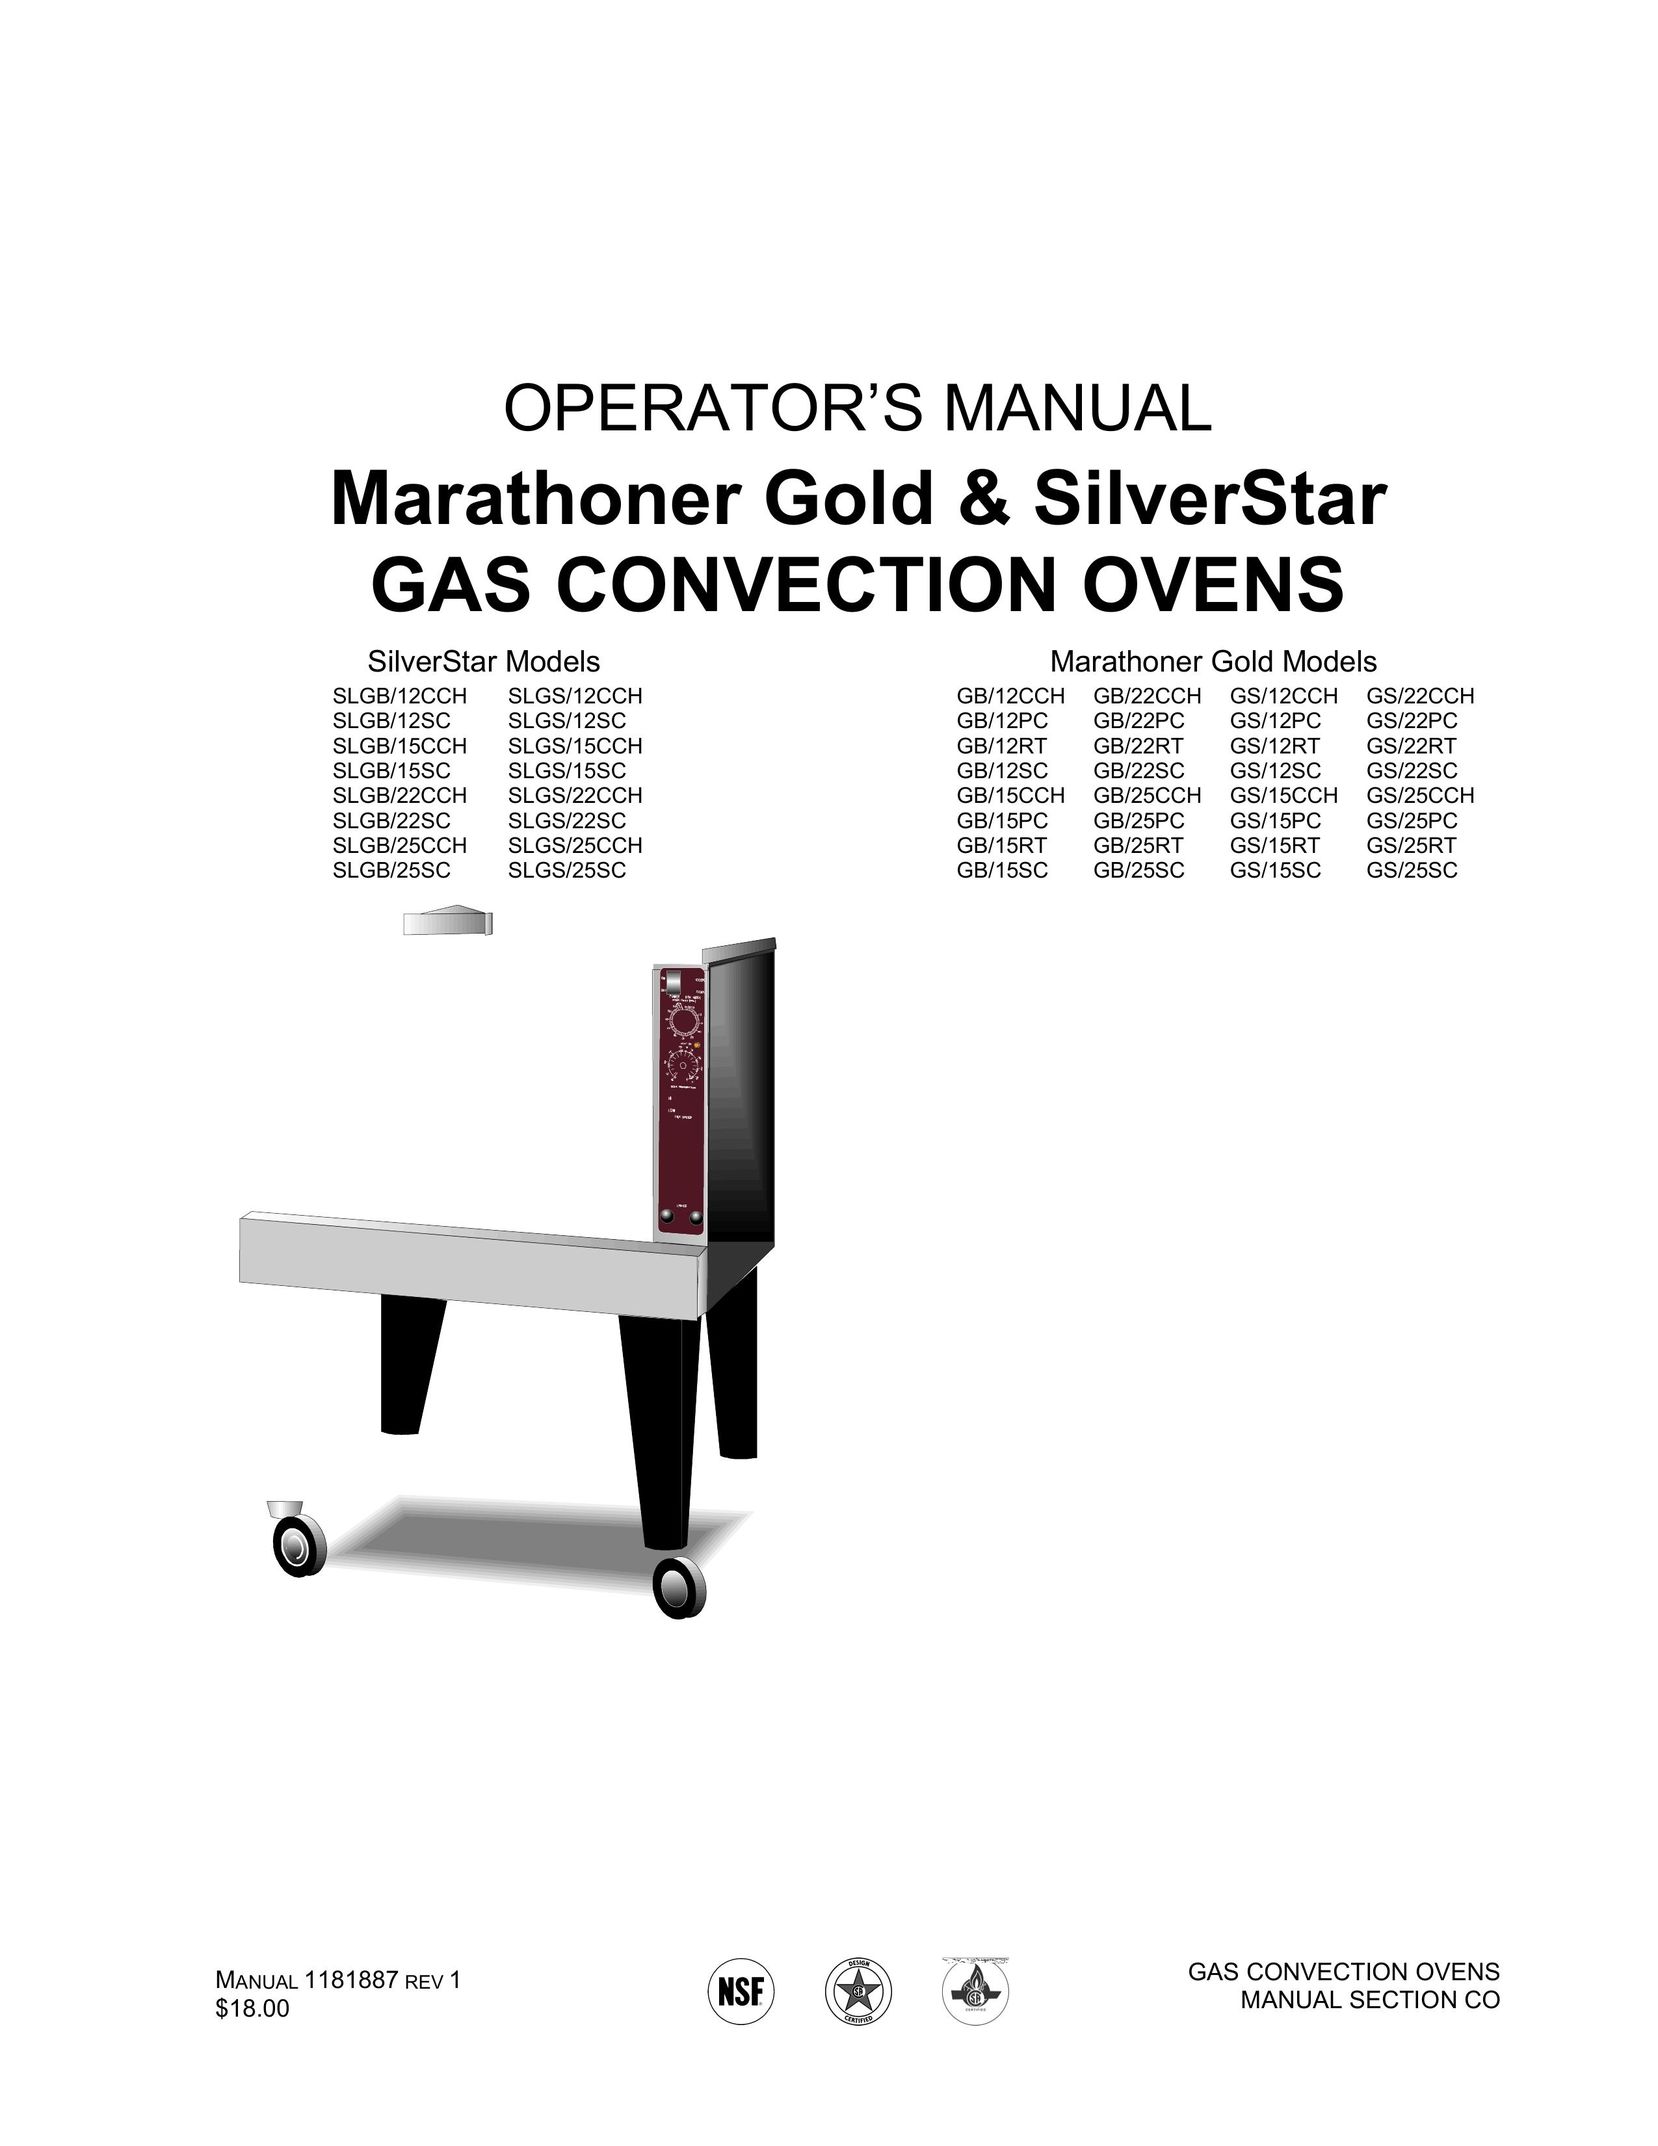 Southbend SLGB/25SC Oven User Manual